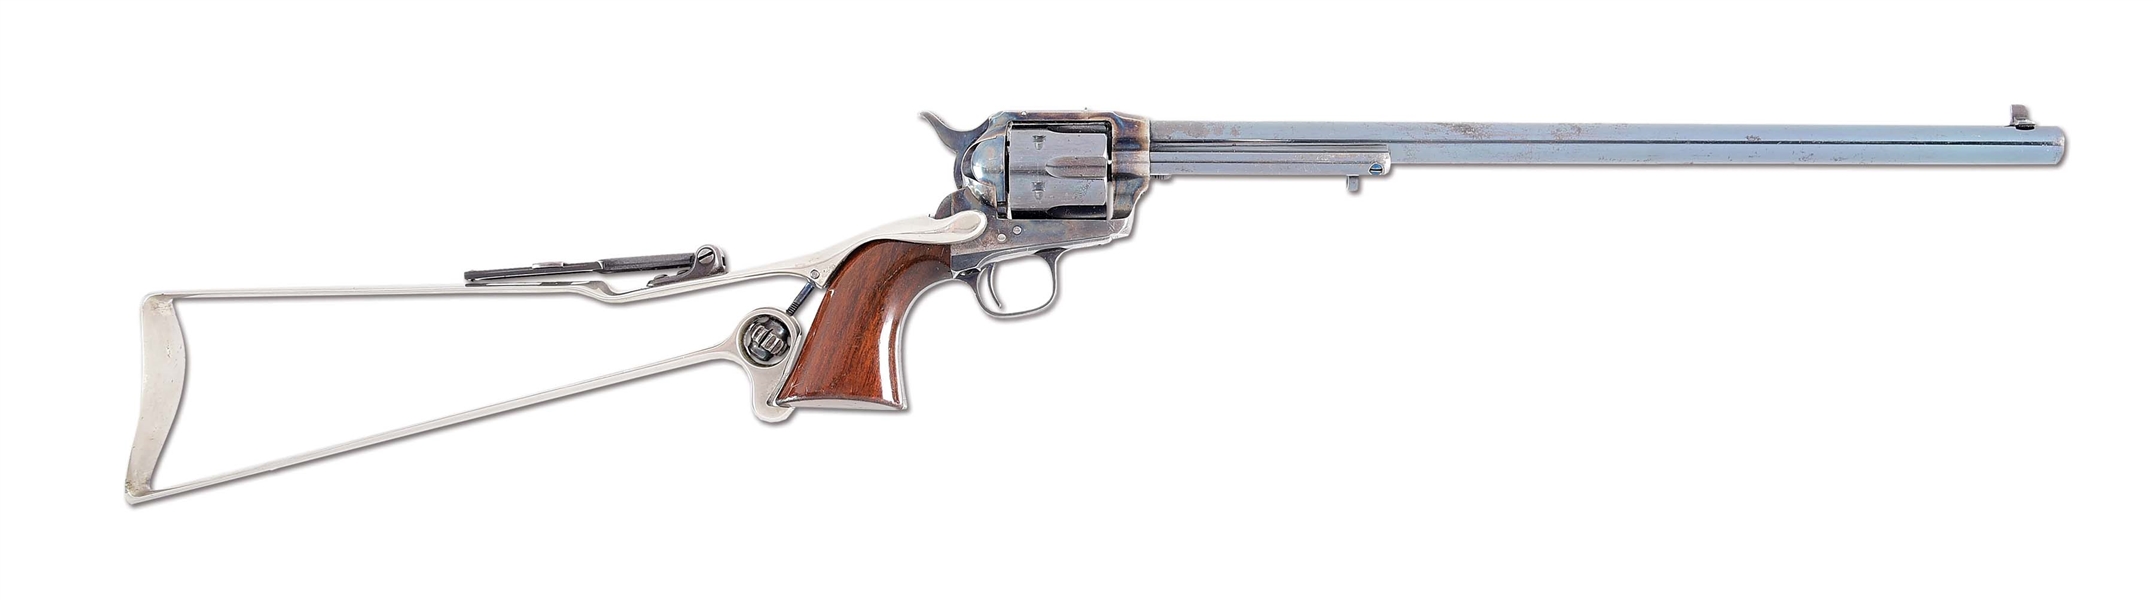 (A) NOTED COLLECTOR MEL GUYS LEGENDARY COLT "BUNTLINE SPECIAL" SINGLE ACTION ARMY REVOLVER